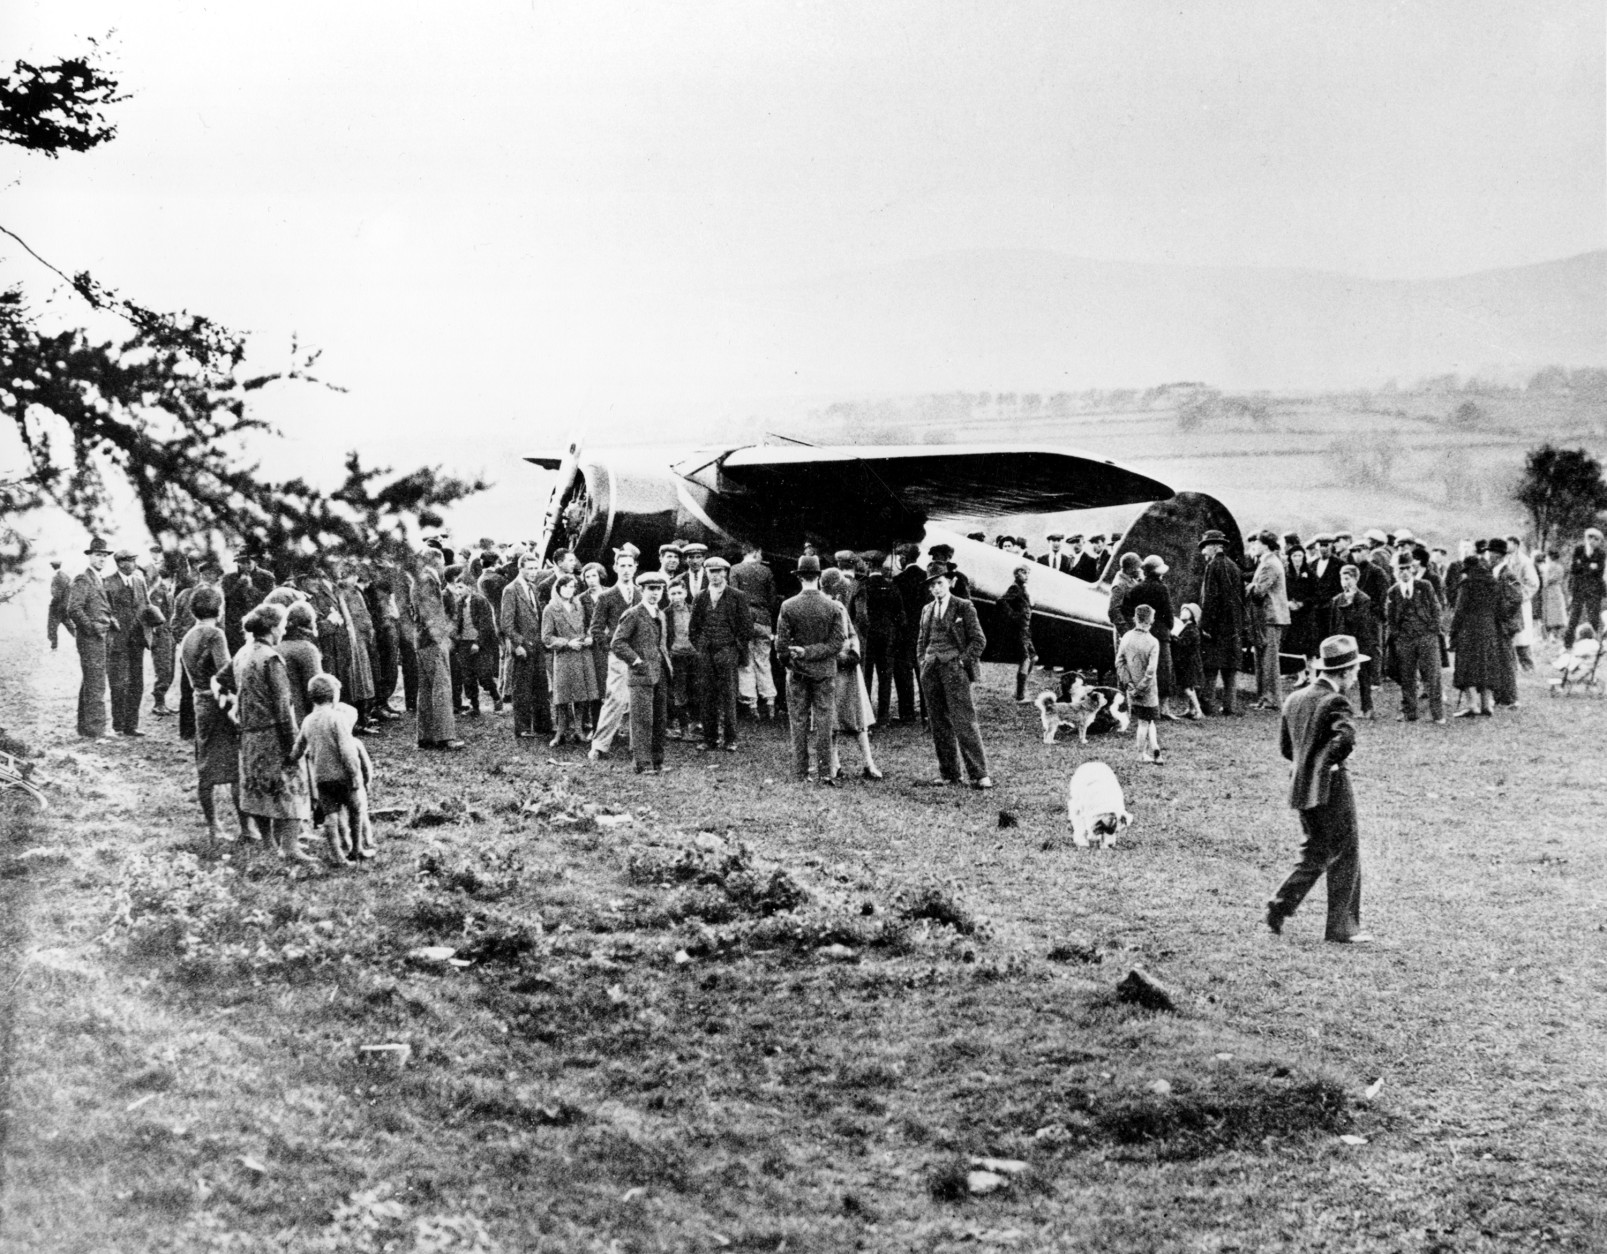 People surround Amelia Earhart's single-engine Lockheed Vega plane after she landed in an open field near Londonderry, northern Ireland, on May 21, 1932.  Earhart began her solo nonstop transatlantic flight on May 20 from Newfoundland, Canada.  (AP Photo)